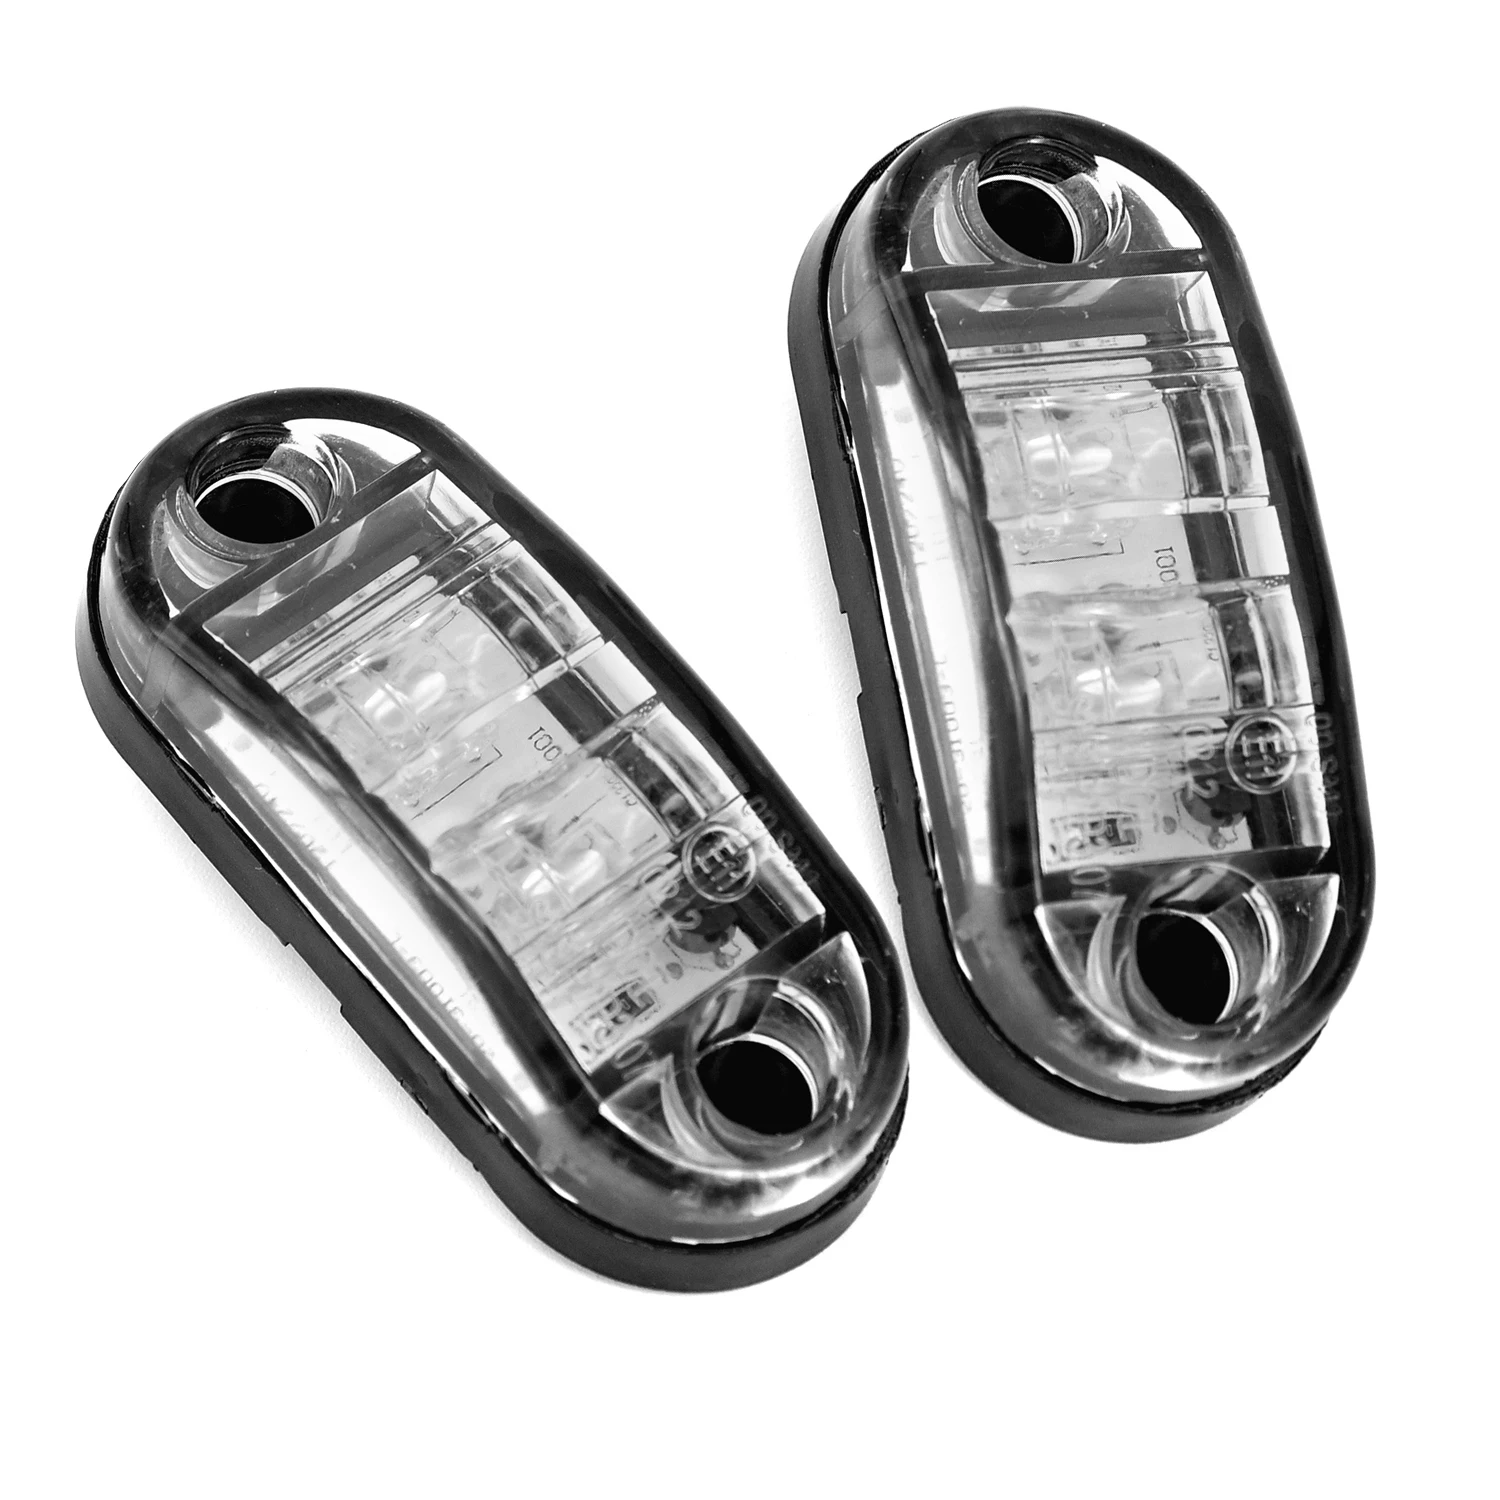 2Pcs Set White 12V LED Car Side Marker Tail Light 24V Trailer Truck Lamp E11 Bulb Can Be Used As A Tail Light For Your Car Acces images - 6